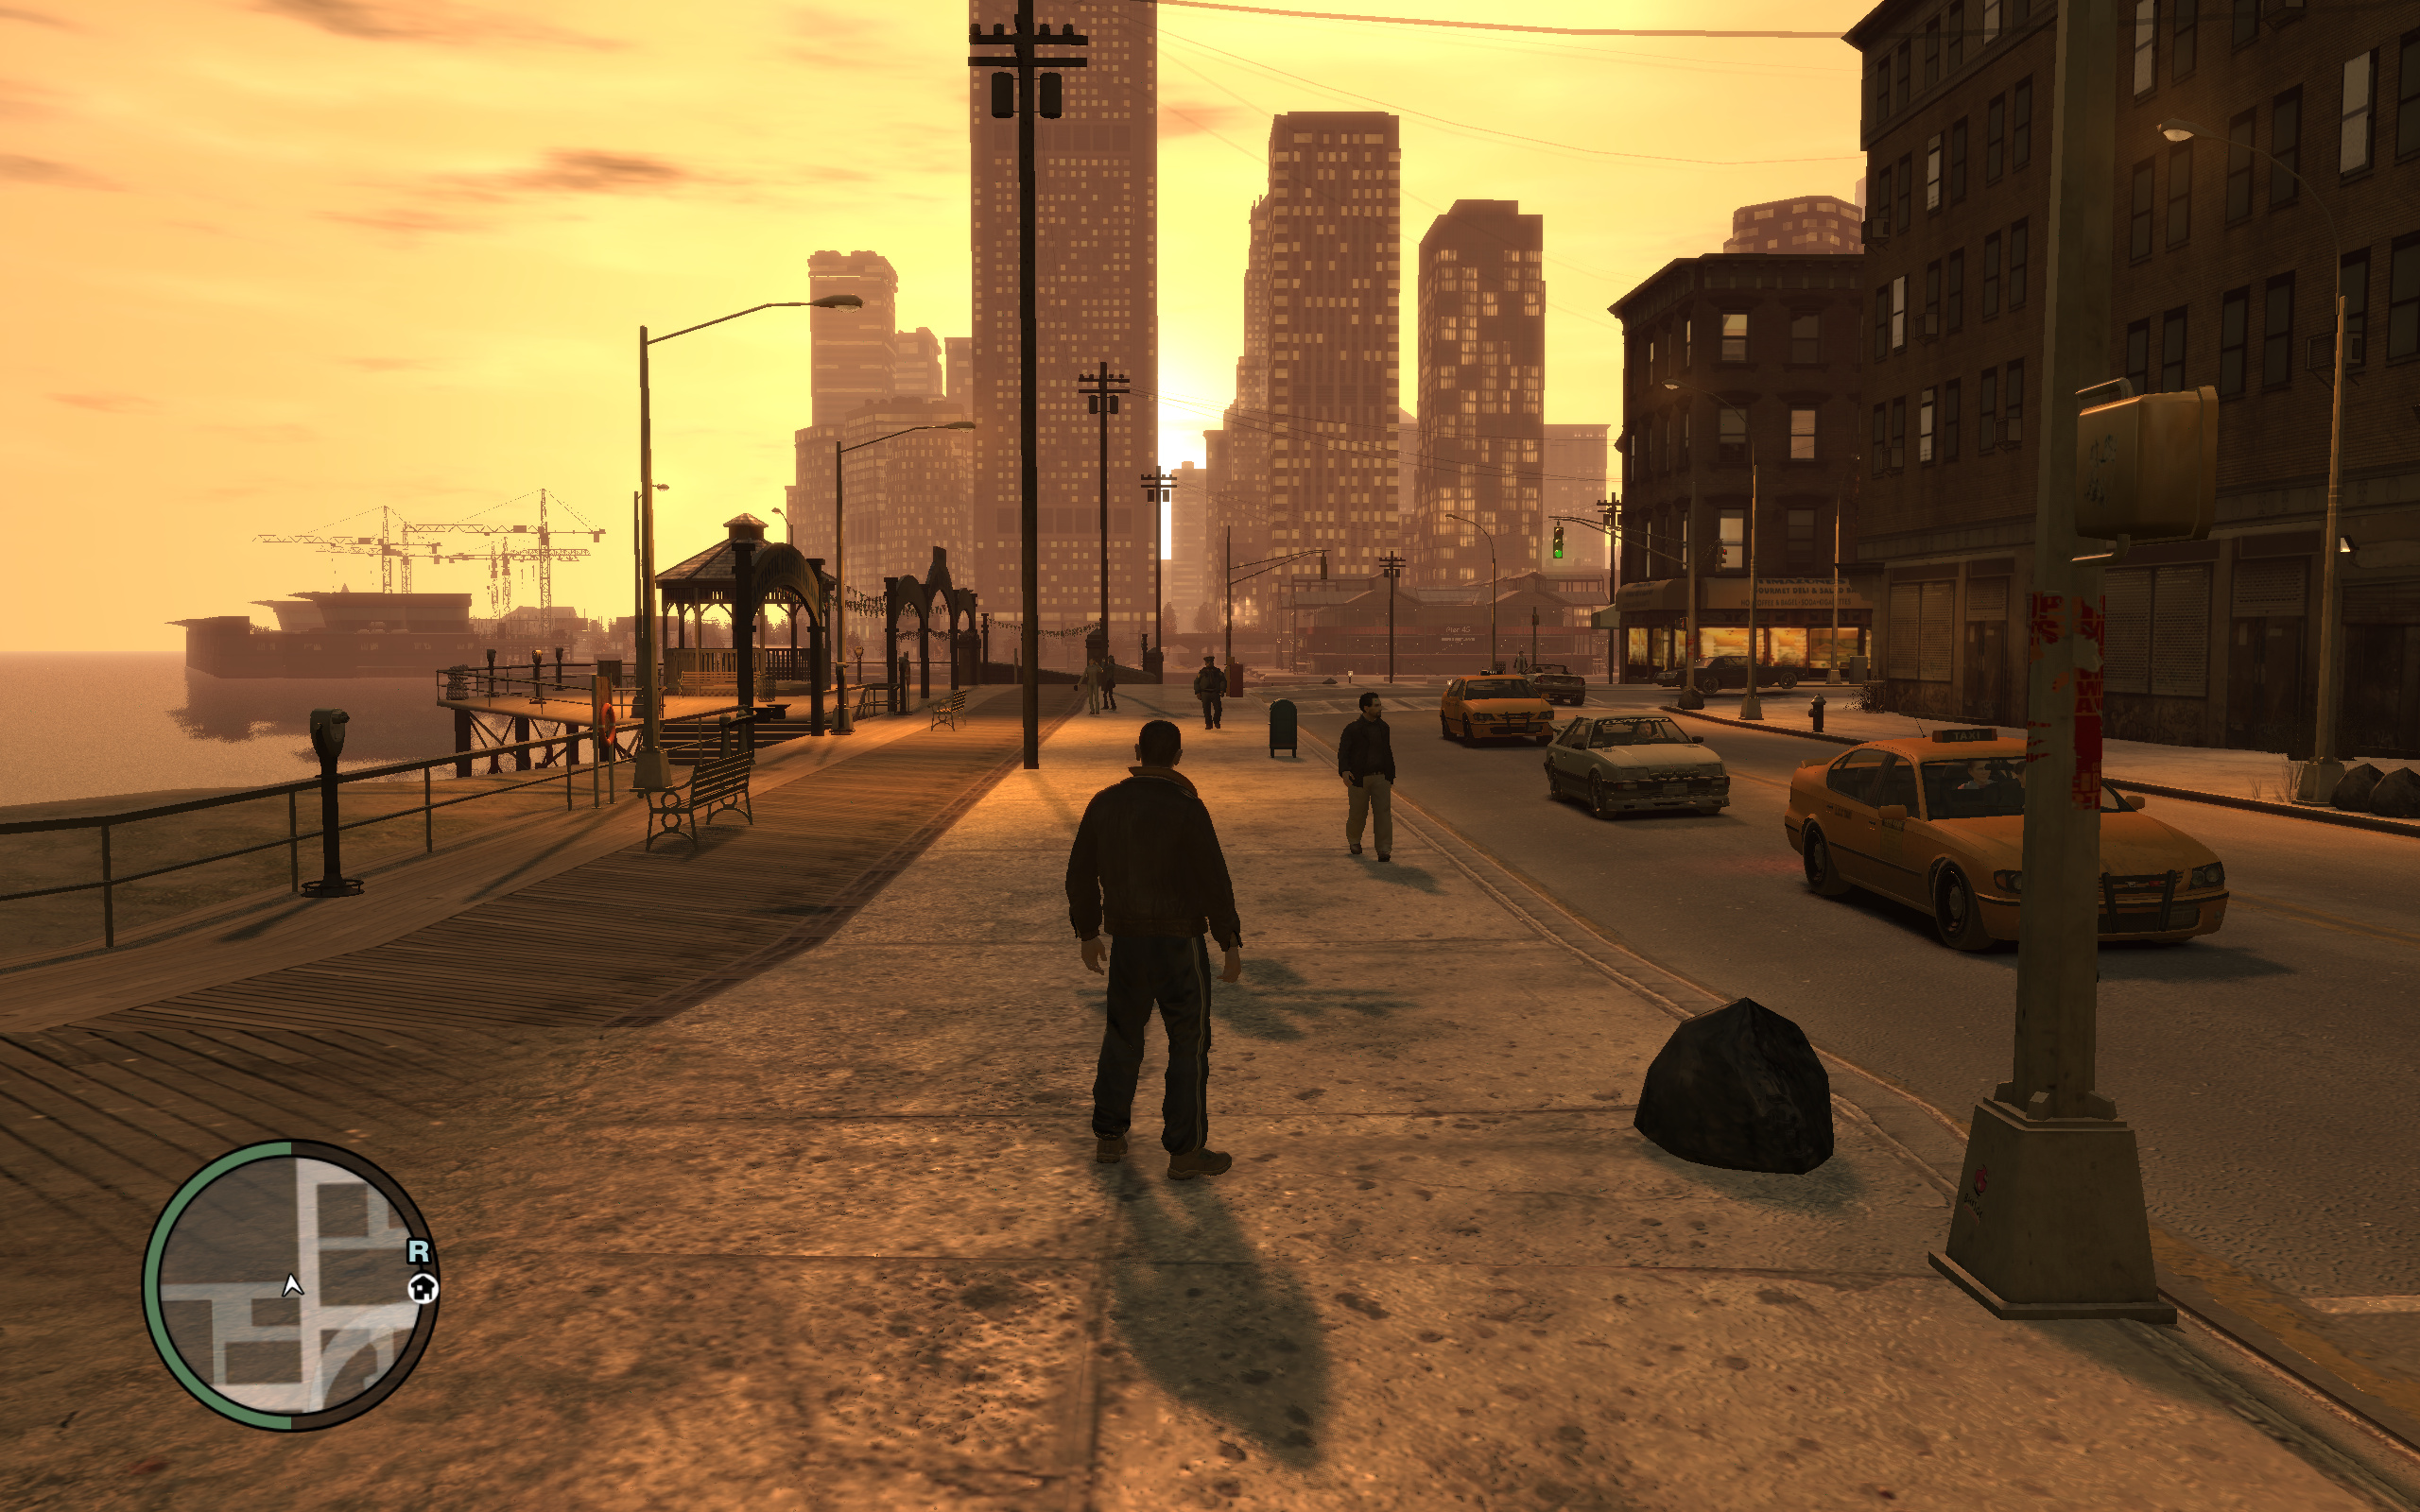 Review Game : GTA (Grand Theft Auto) Series